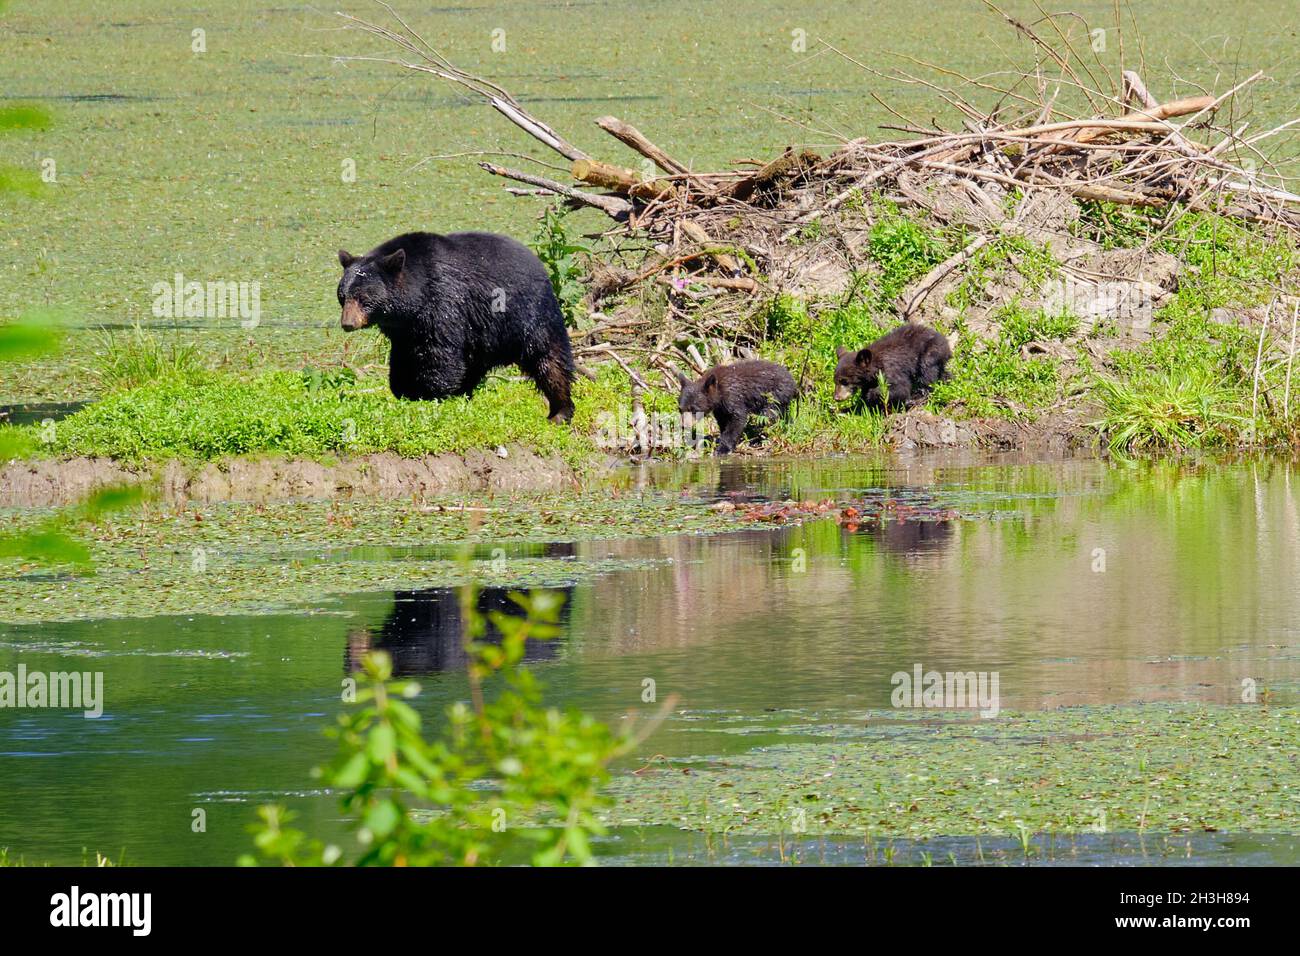 Two young bear cubs follow their mother beside a pond and a beaver lodge. Stock Photo